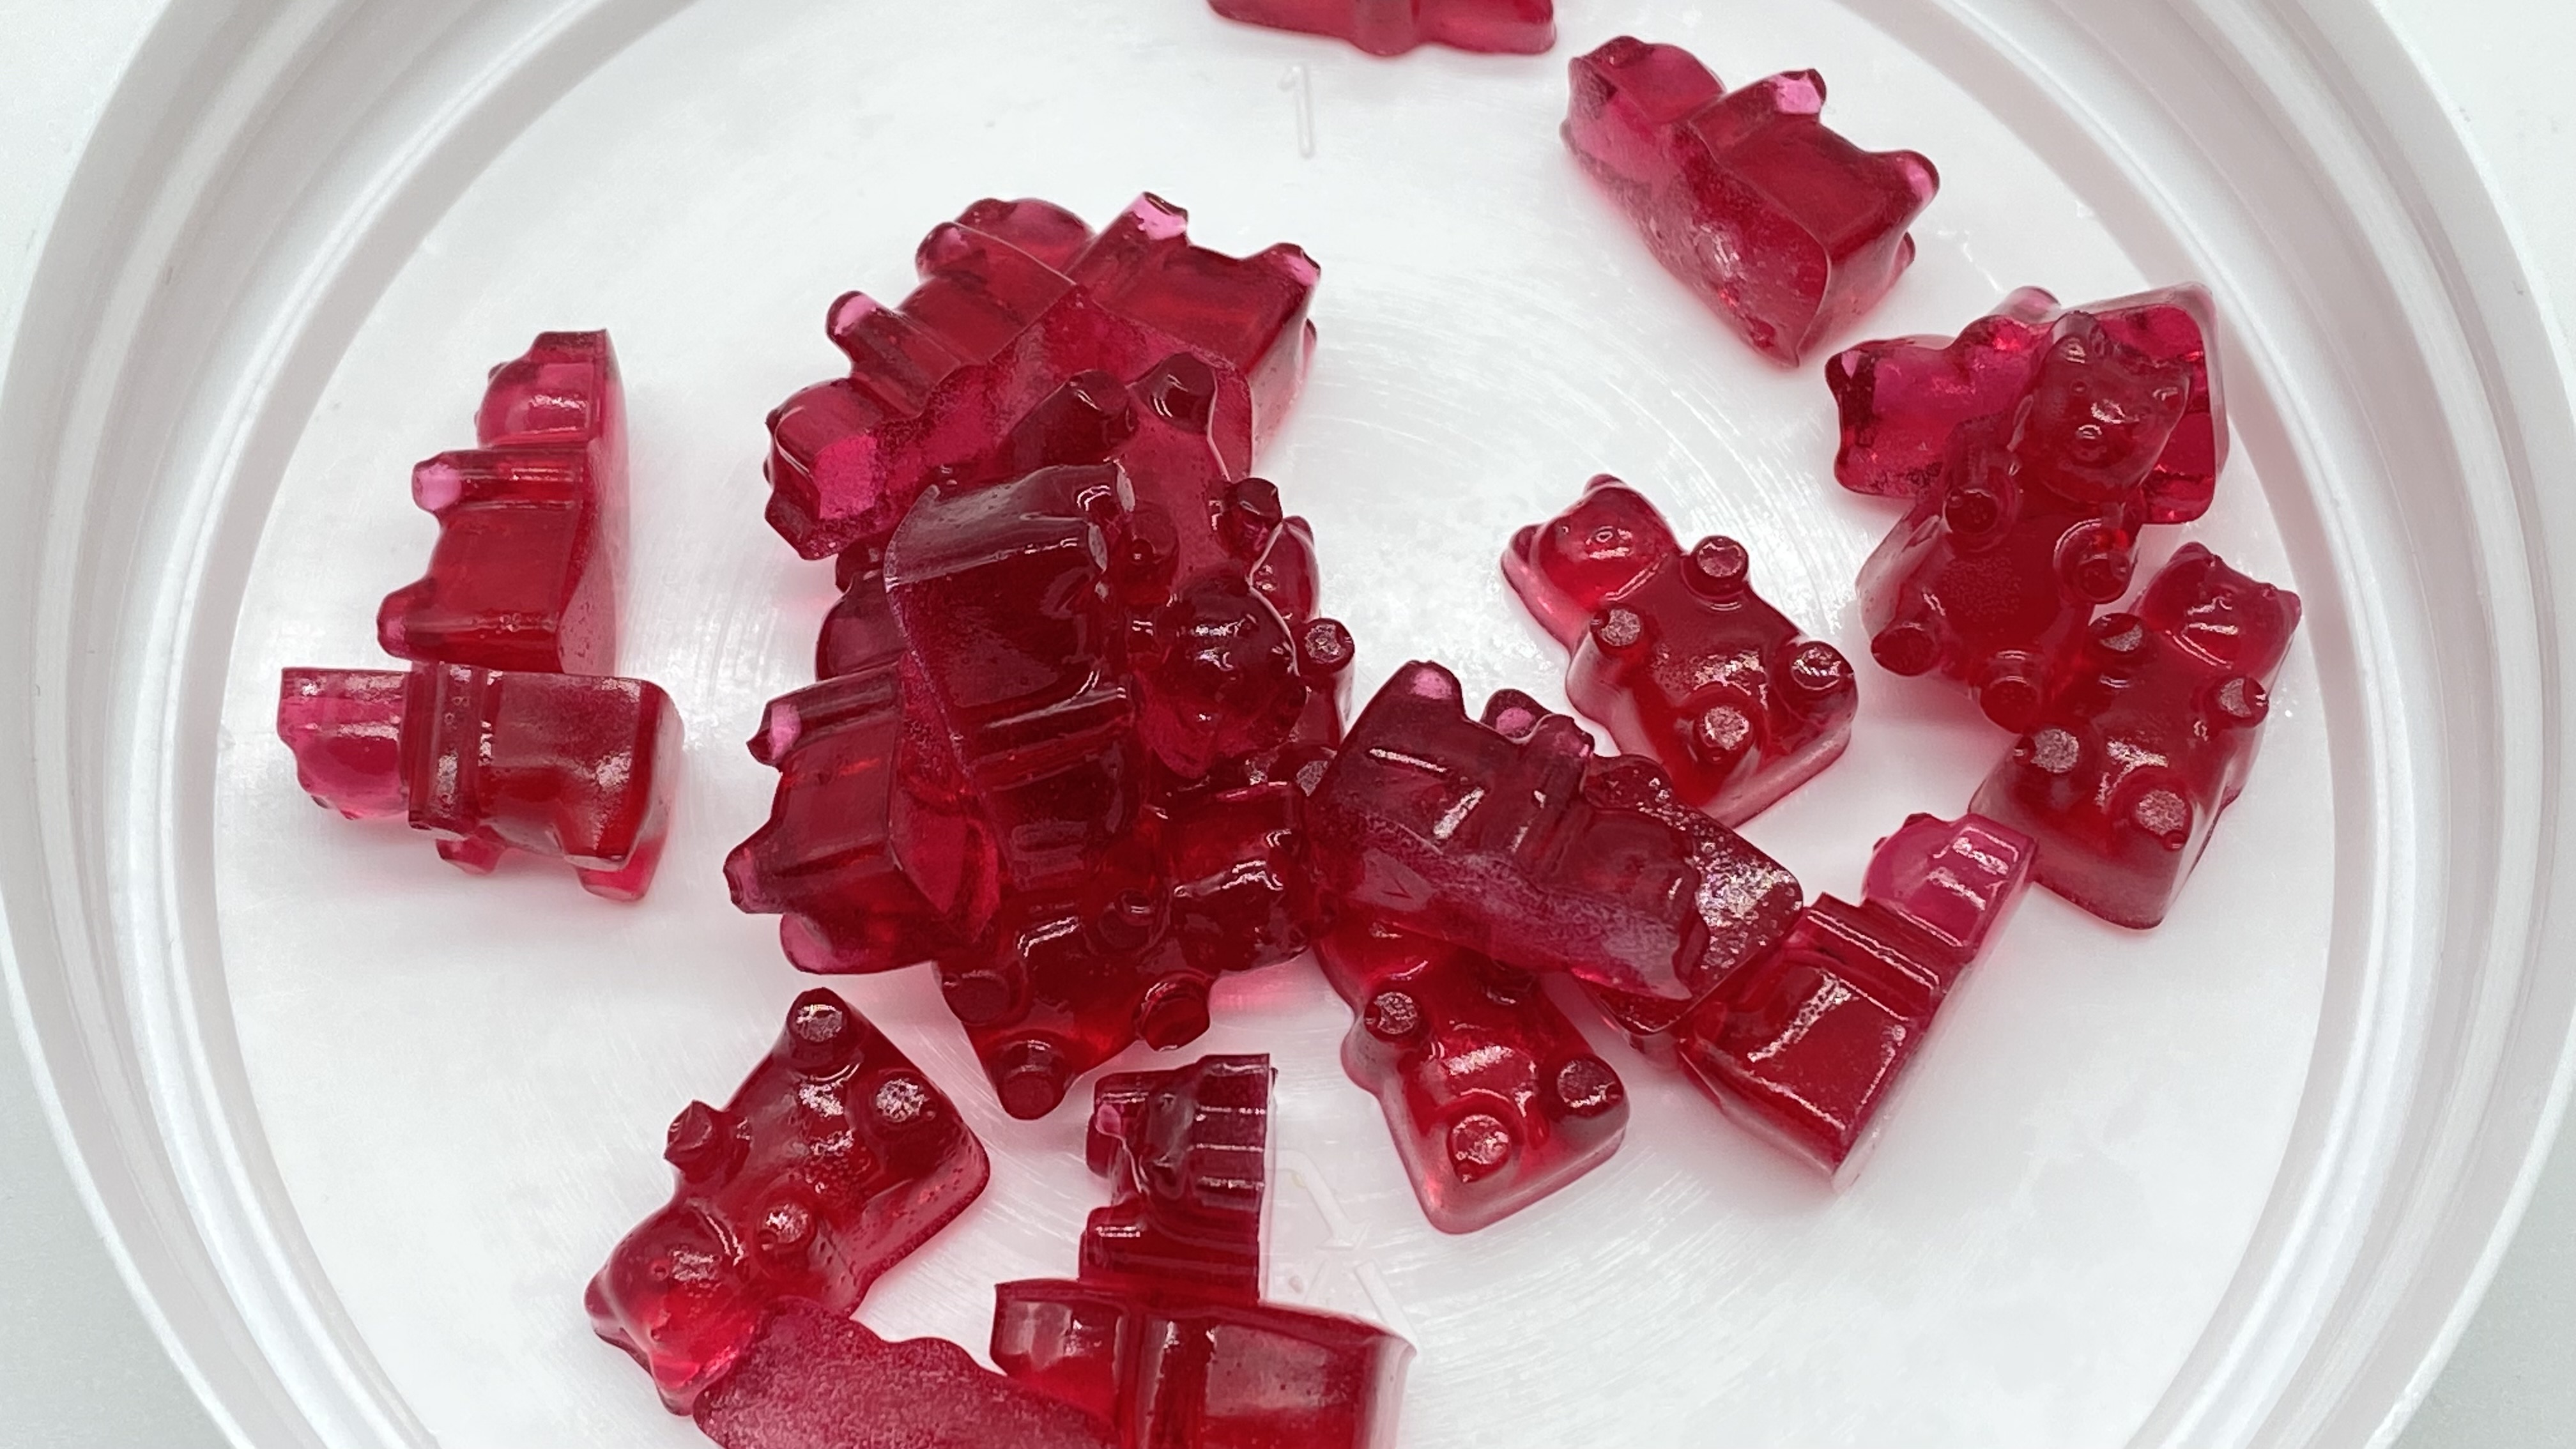 red cabbage extract in gummy sweet application